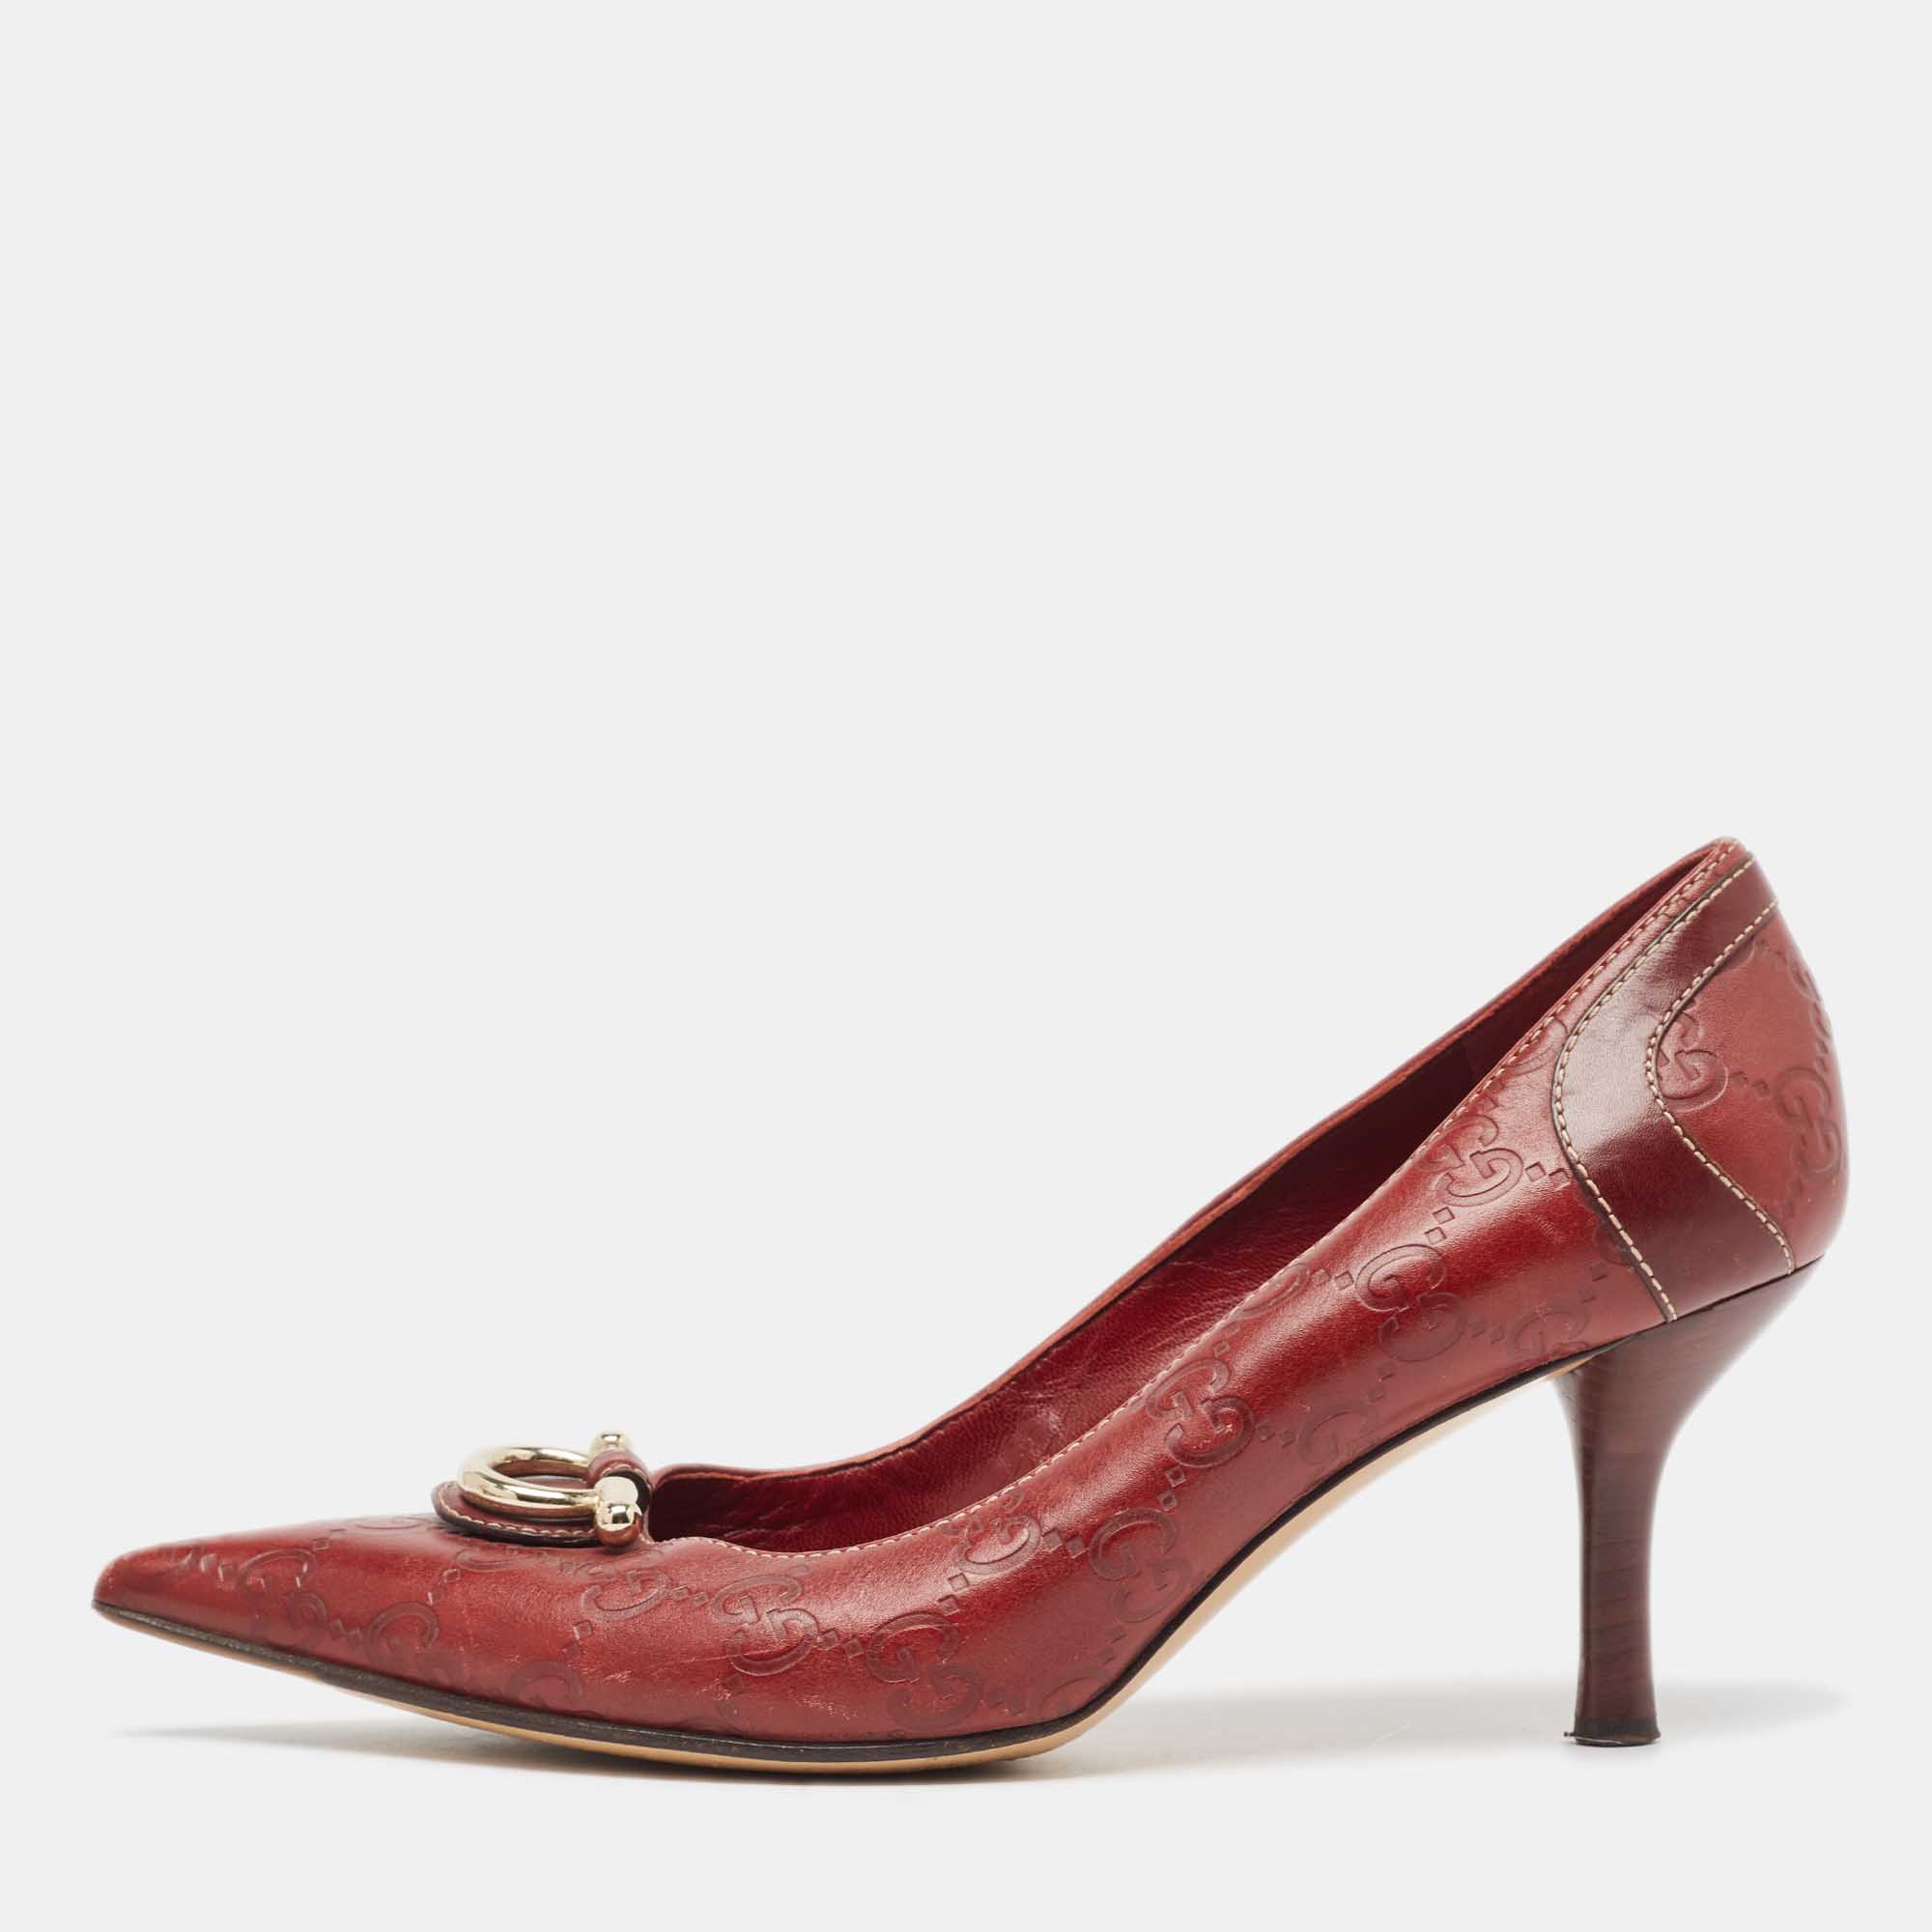 Gucci red guccissima leather icon bit pointed toe pumps size 36.5